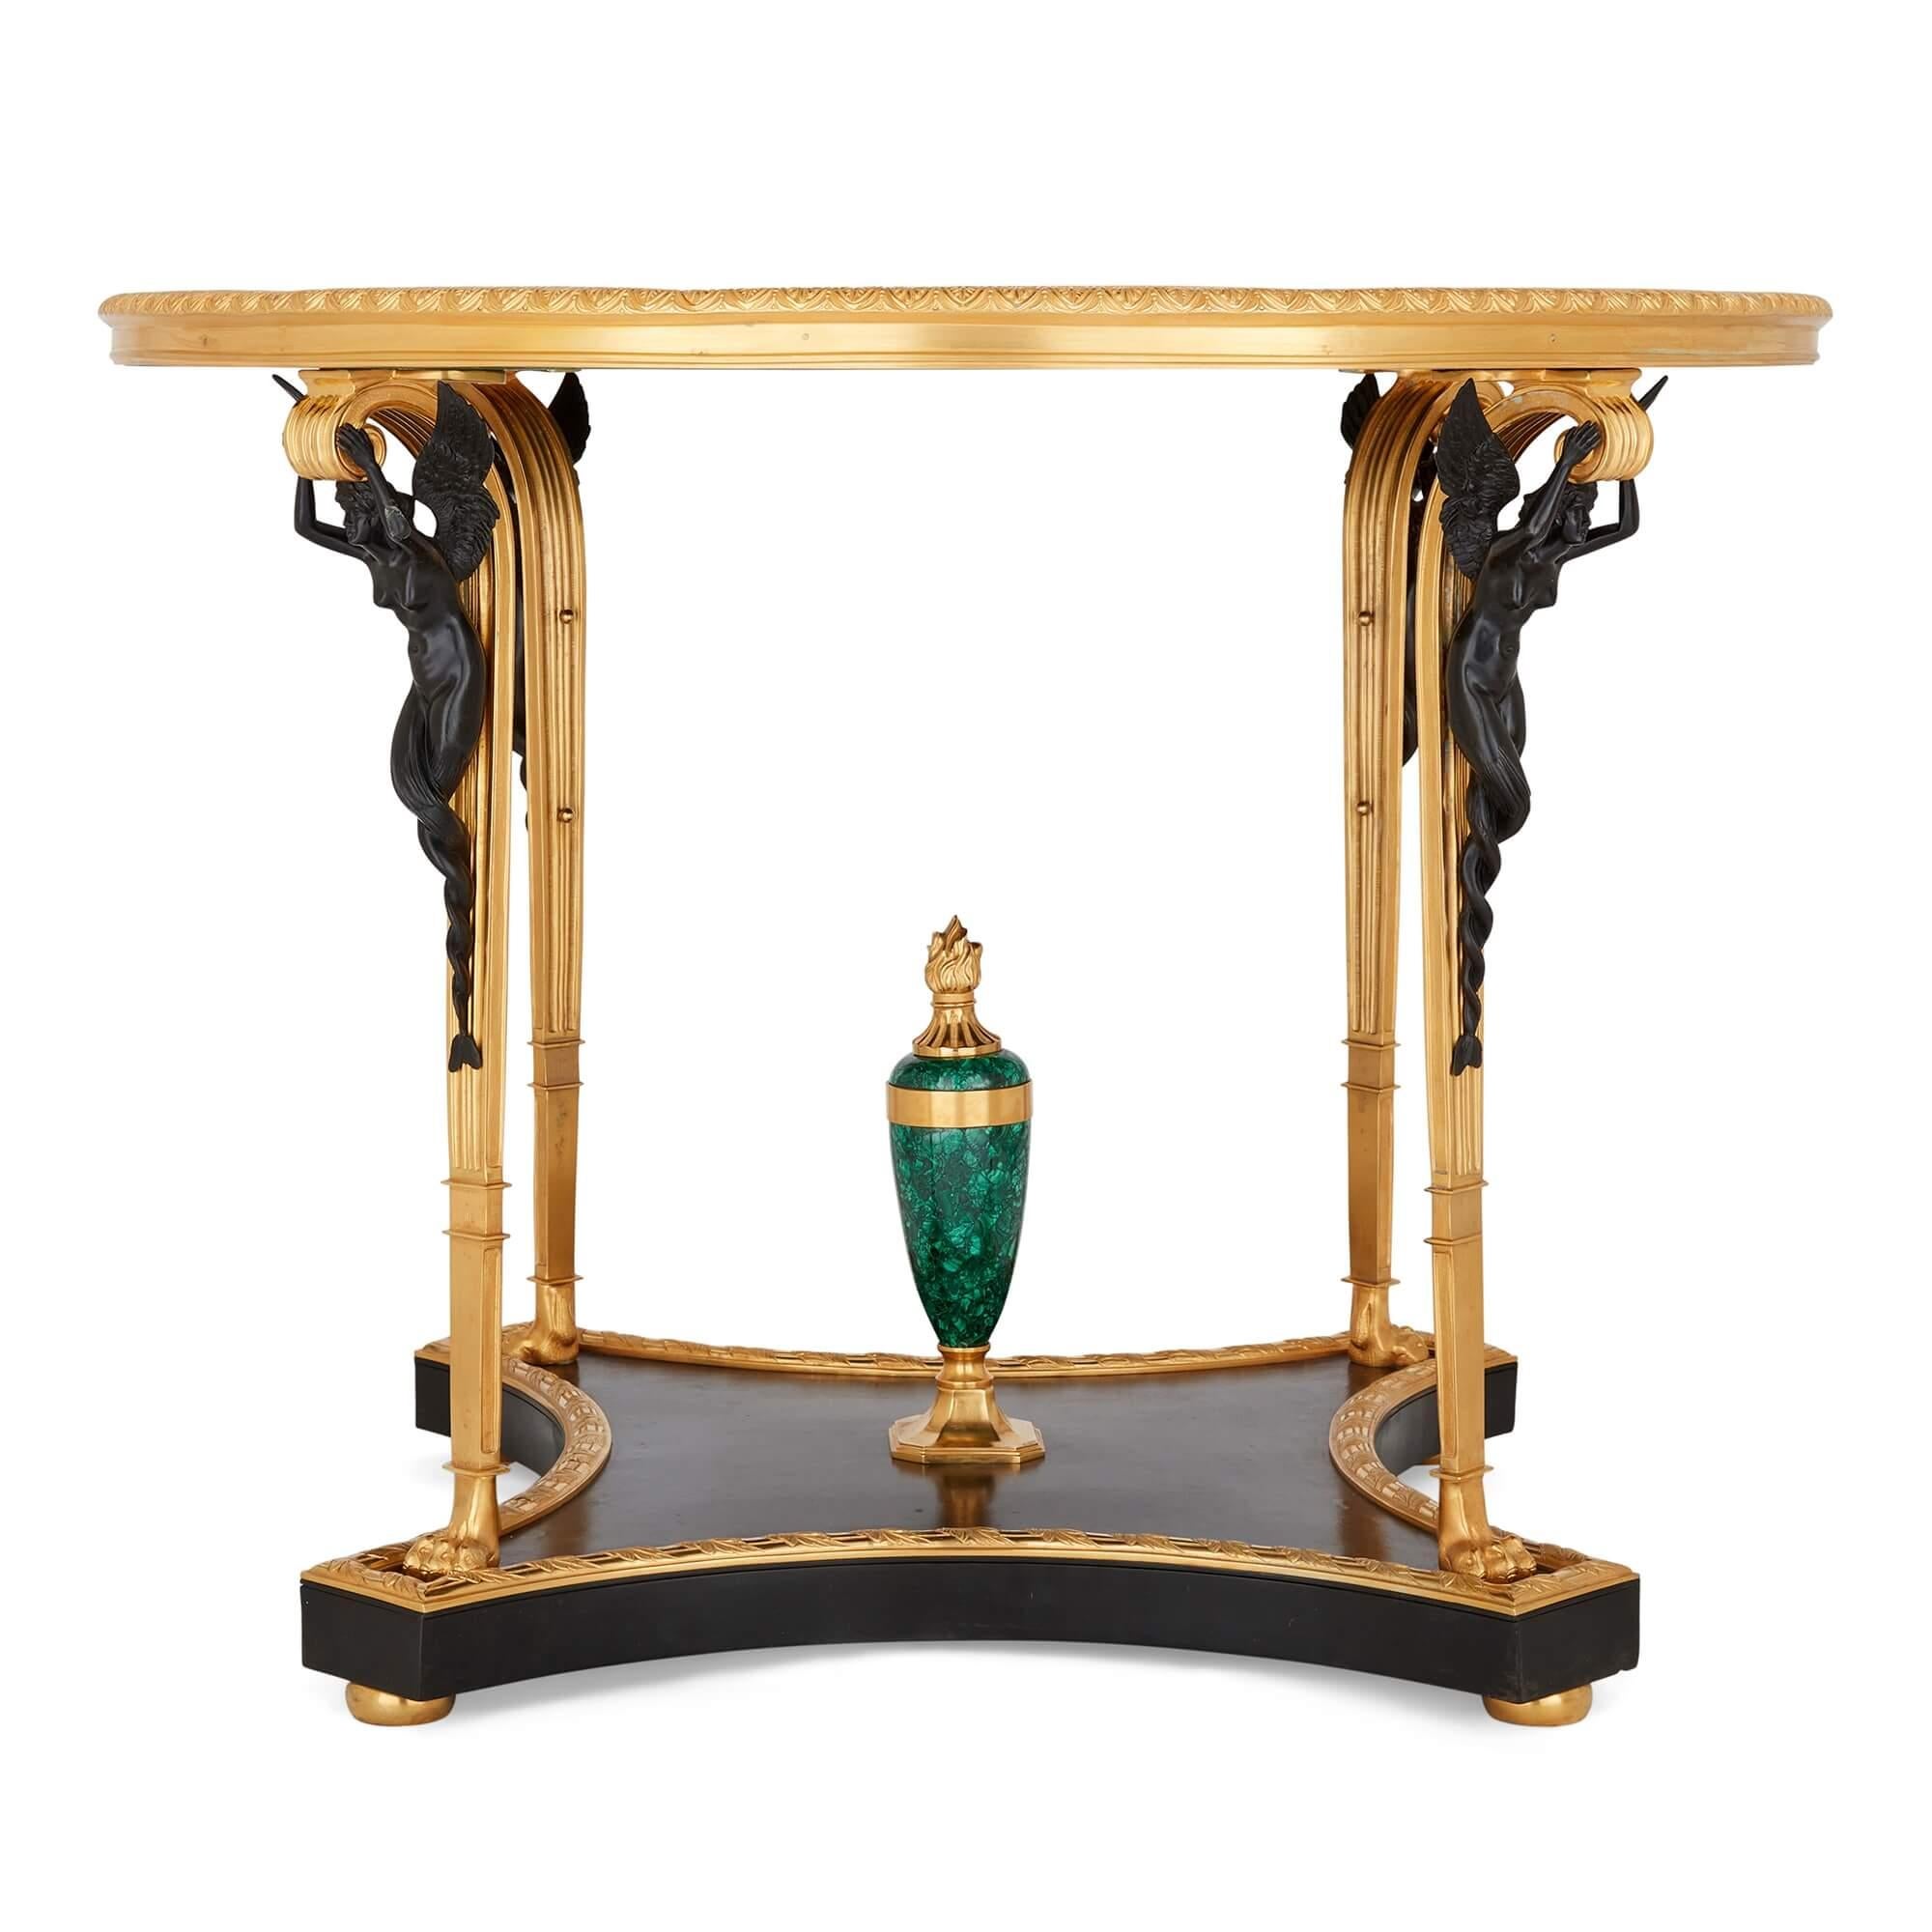 Cast French Empire Style Ormolu Mounted Malachite Centre Table  For Sale